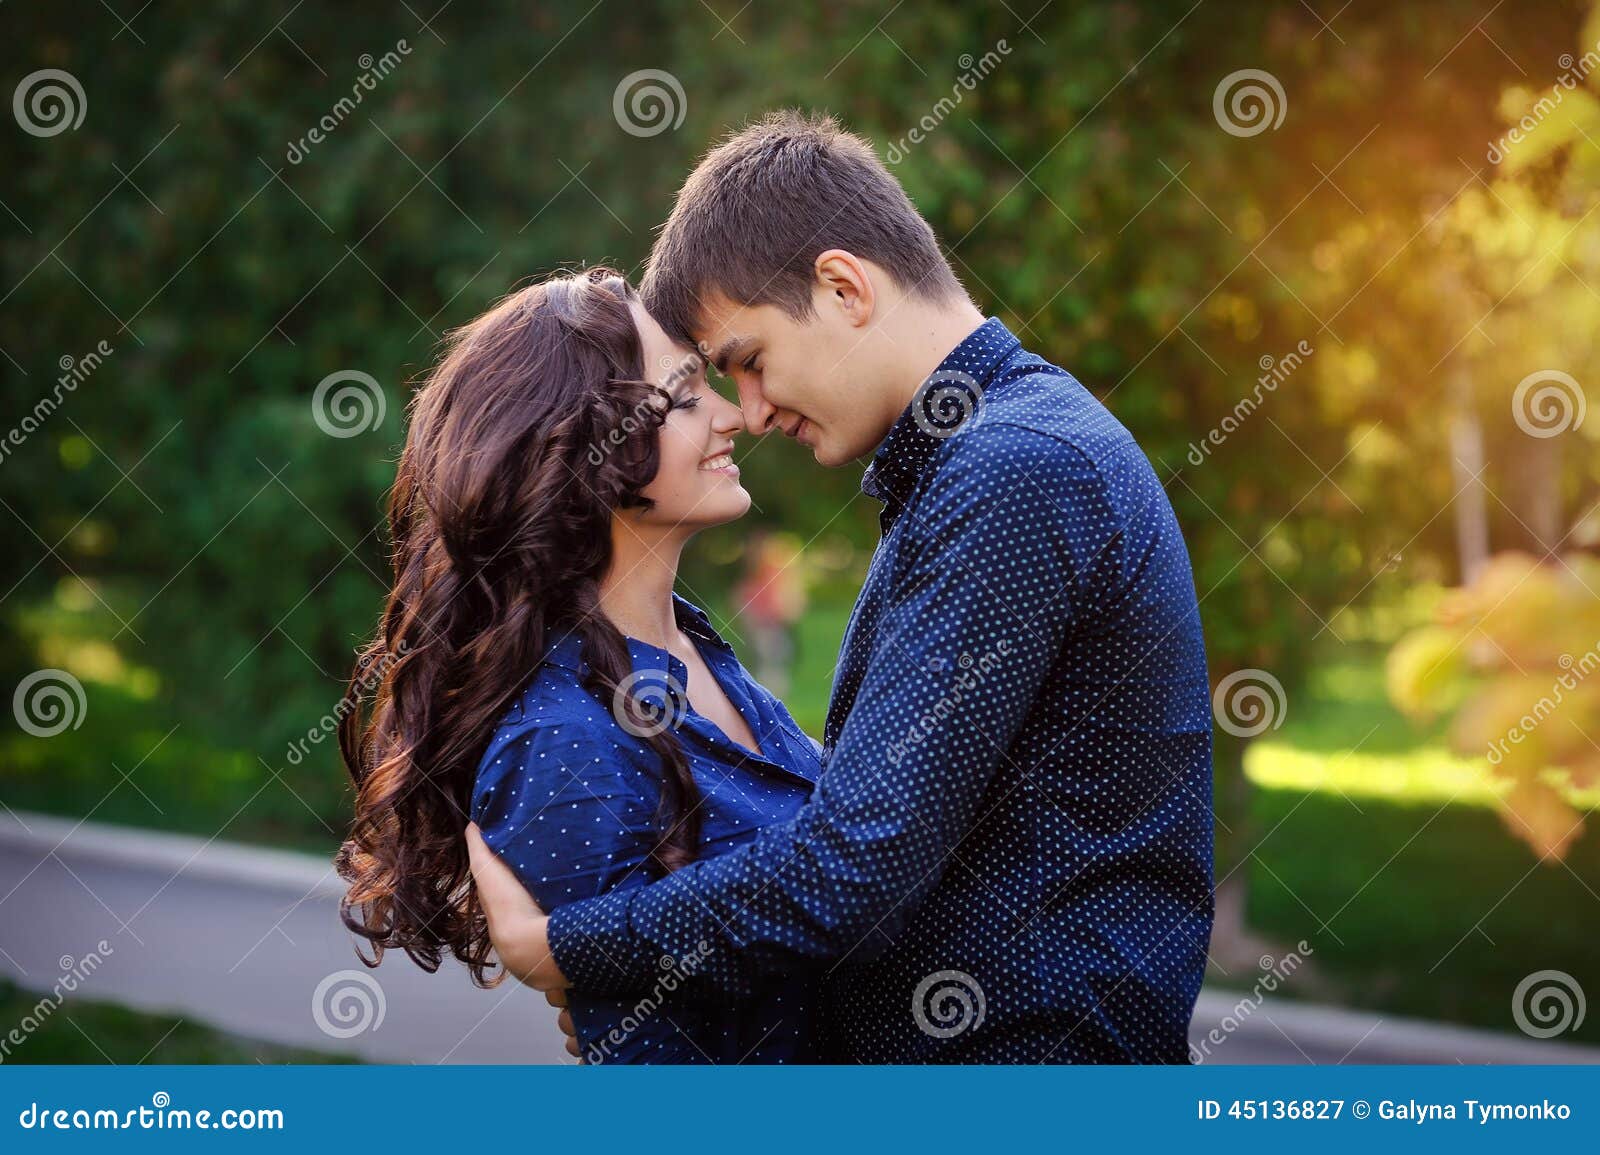 Couple hugging in a park seated in a bench